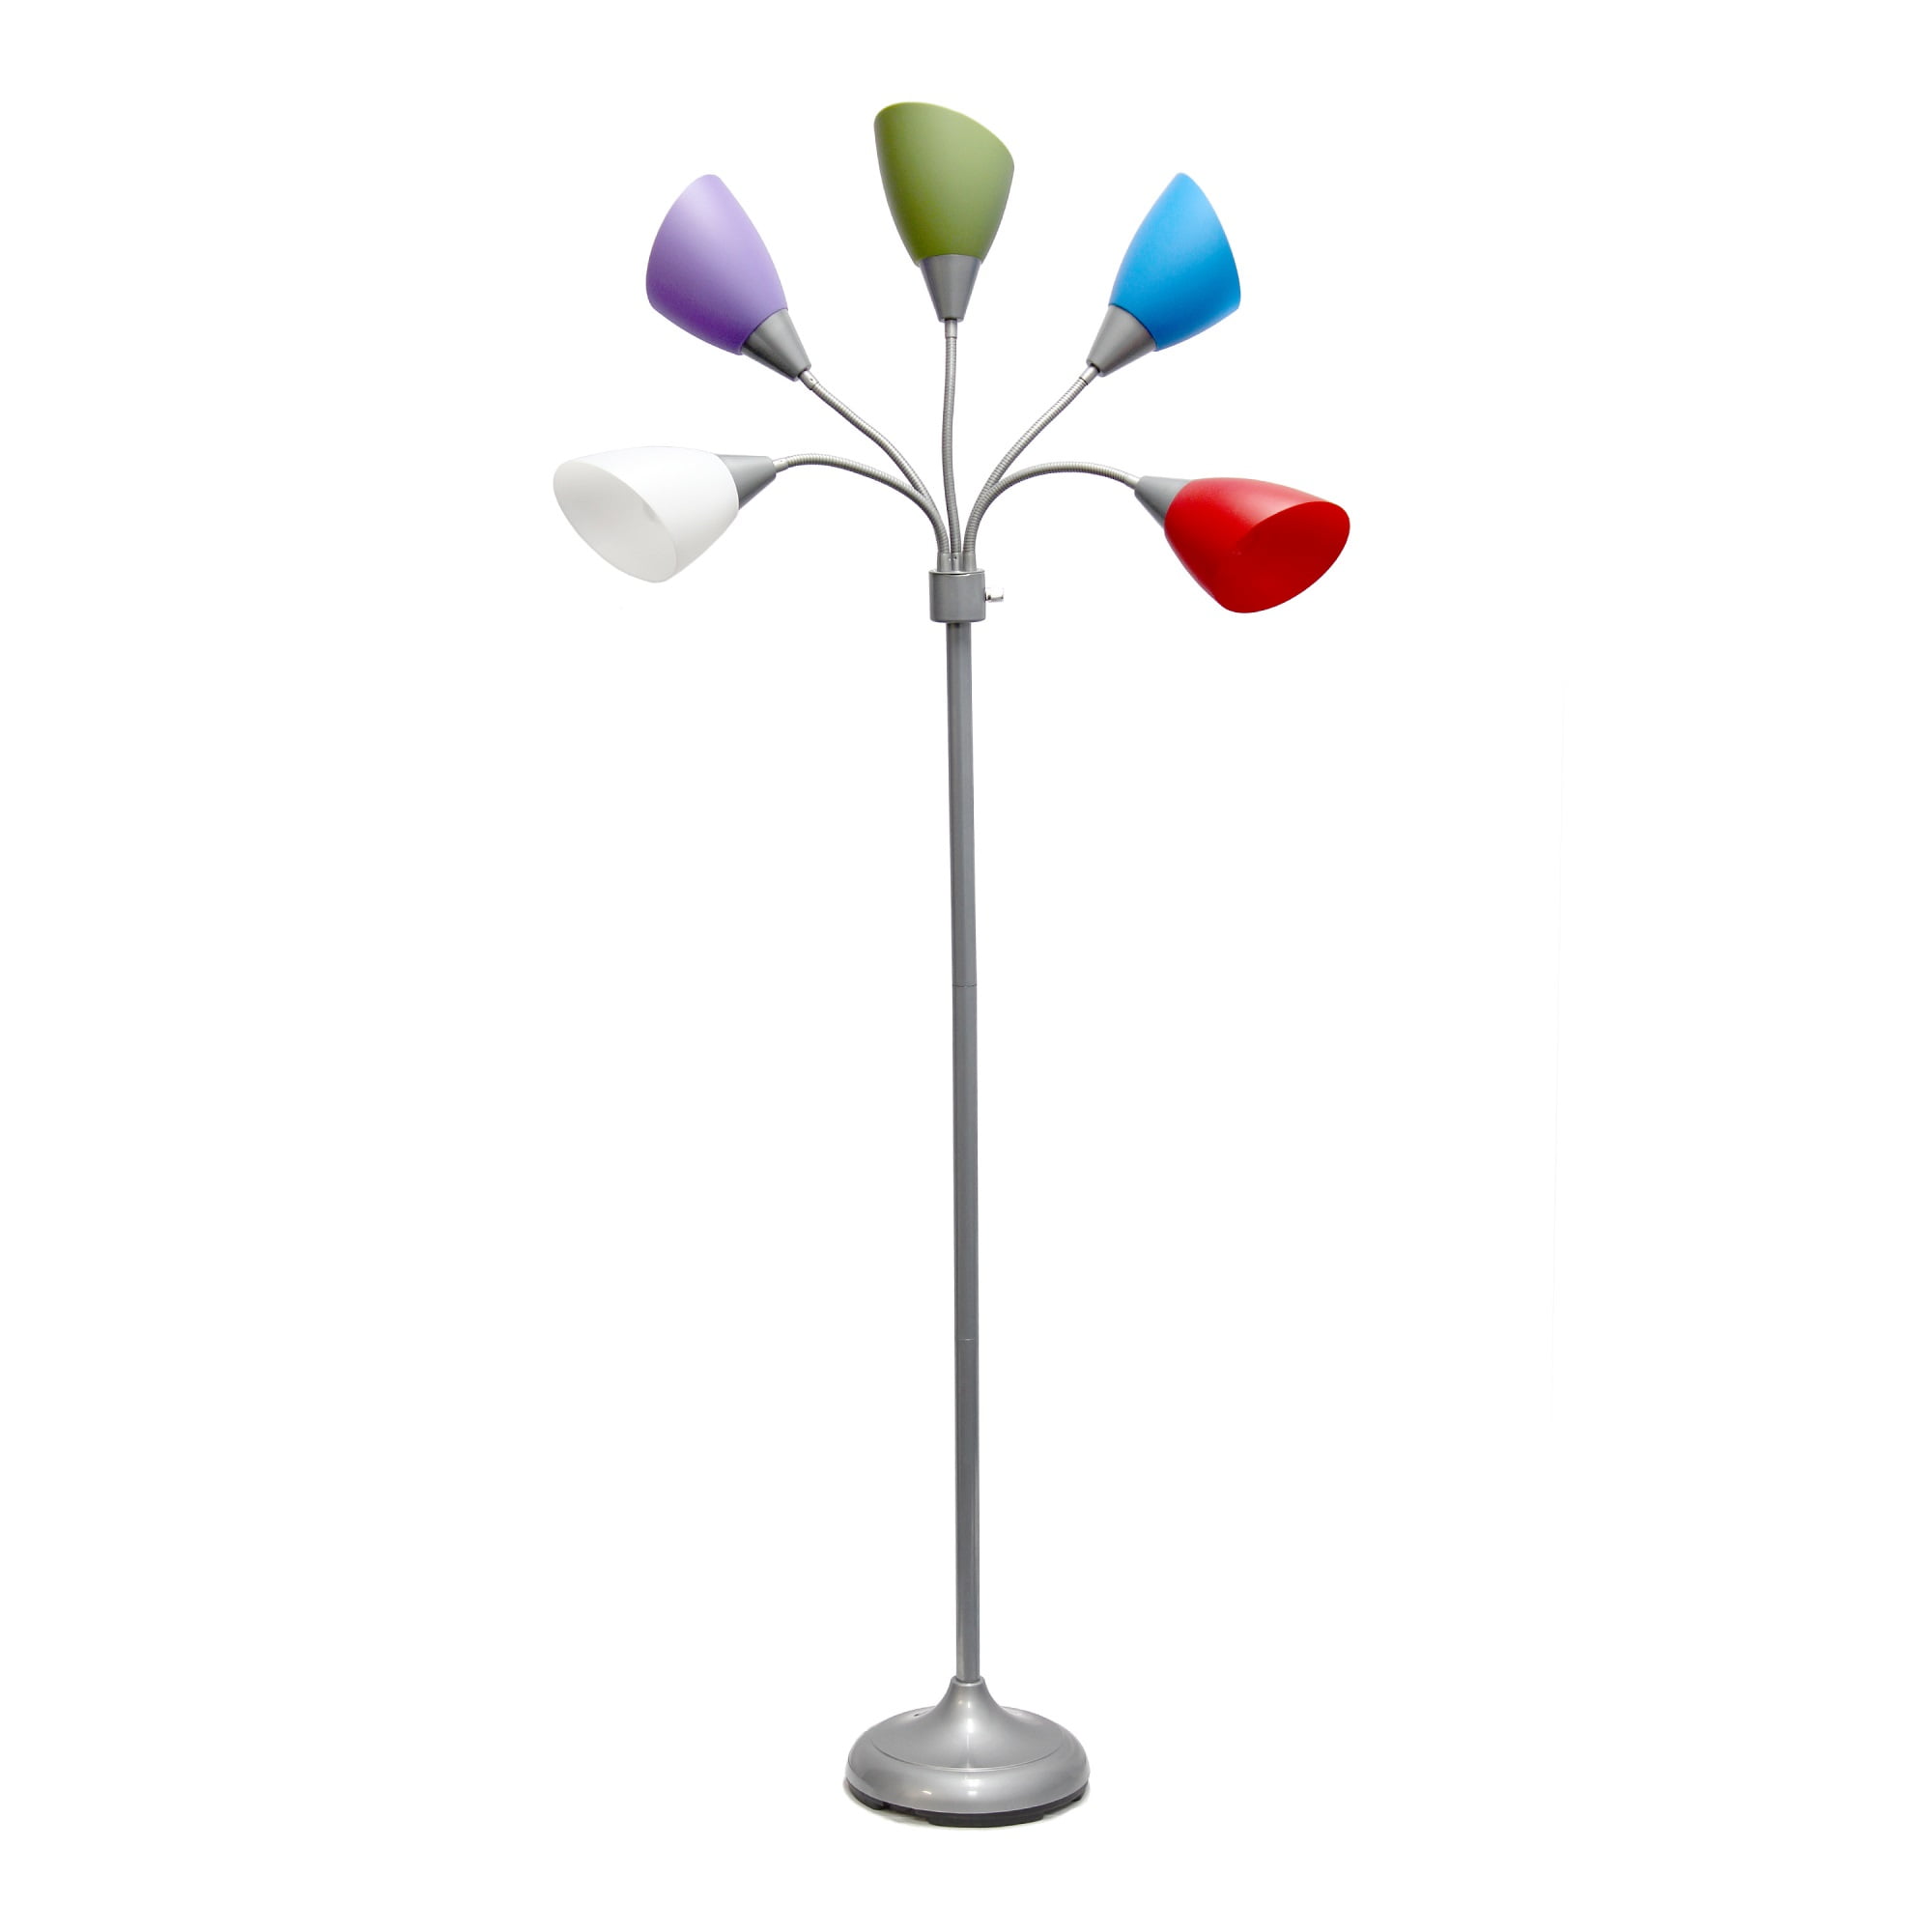 Simple Designs 5 Light Adjustable Gooseneck Silver Floor Lamp with Primary Multicolored Shades